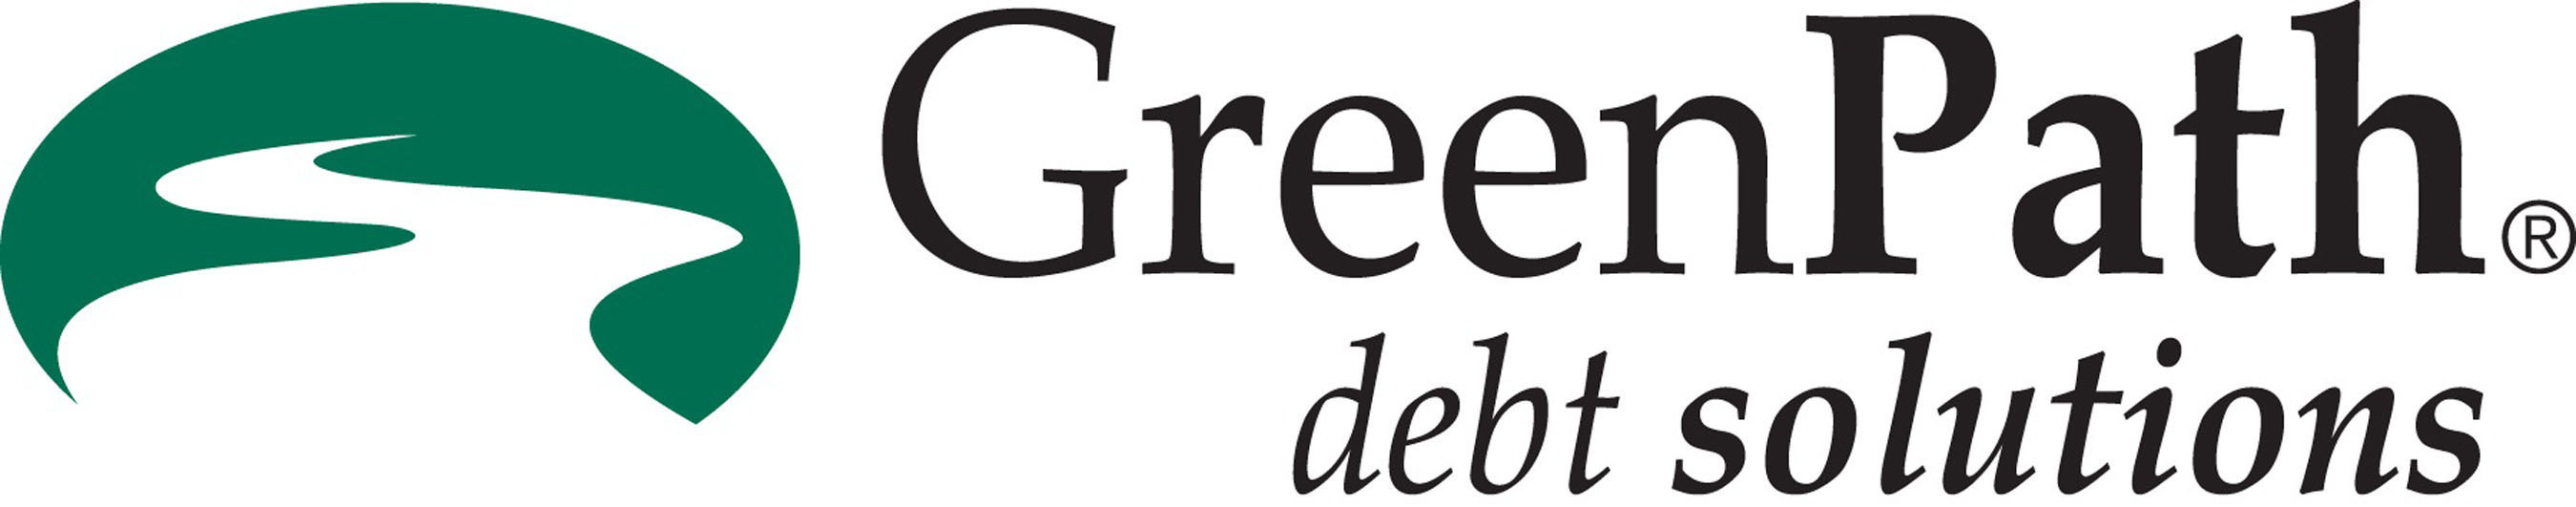 GreenPath Debt Solutions is a nationwide, non-profit financial organization that assists consumers with credit card debt, housing debt, student loan debt, and bankruptcy concerns. Our customized services and attainable solutions have been helping people achieve their financial goals since 1961. Headquartered in Farmington Hills, Michigan, GreenPath operates more than 50 full-time branch offices in 11 states.